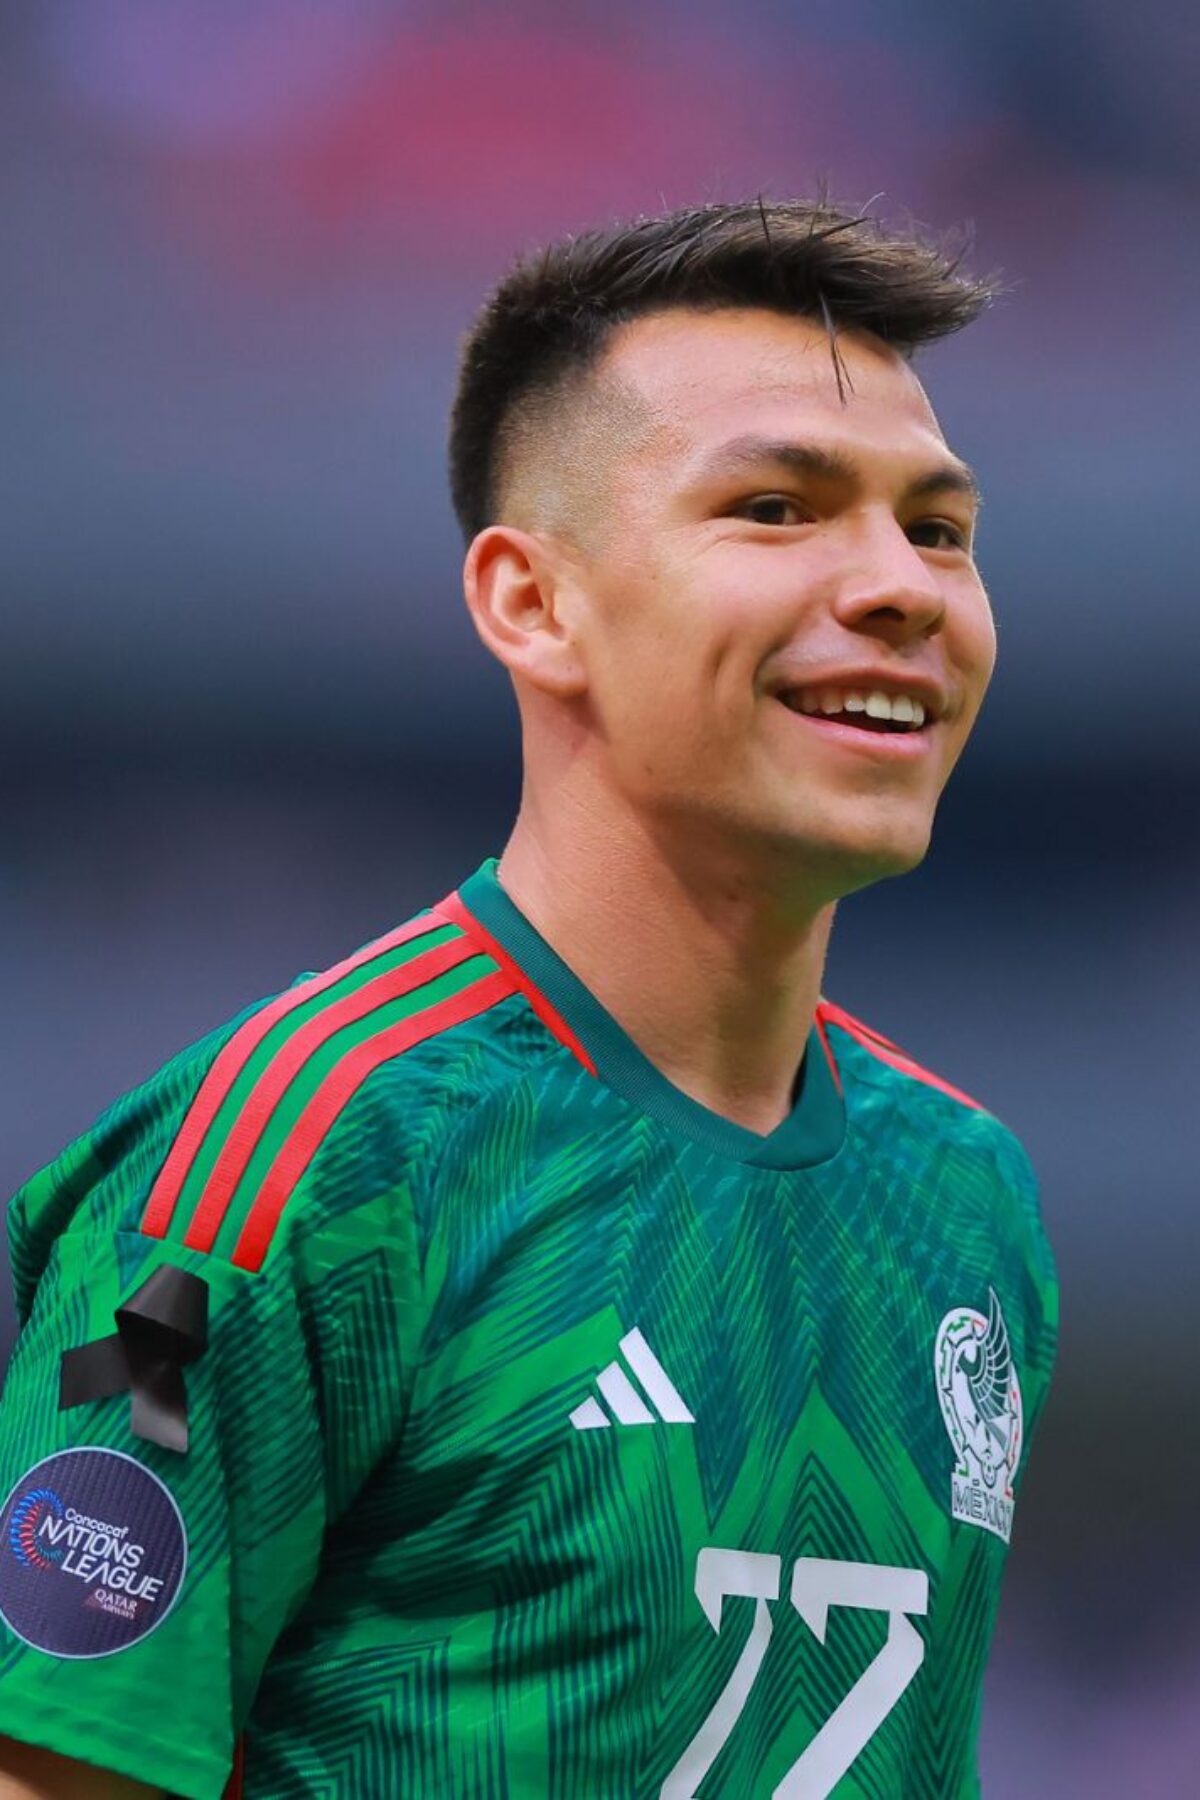 MEXICO CITY, MEXICO - MARCH 26: Hirving Lozano of Mexico looks on during the match between Mexico and Jamaica as part of the CONCACAF Nations League at Azteca stadium on March 26, 2023 in Mexico City, Mexico. (Photo by Hector Vivas/Getty Images)